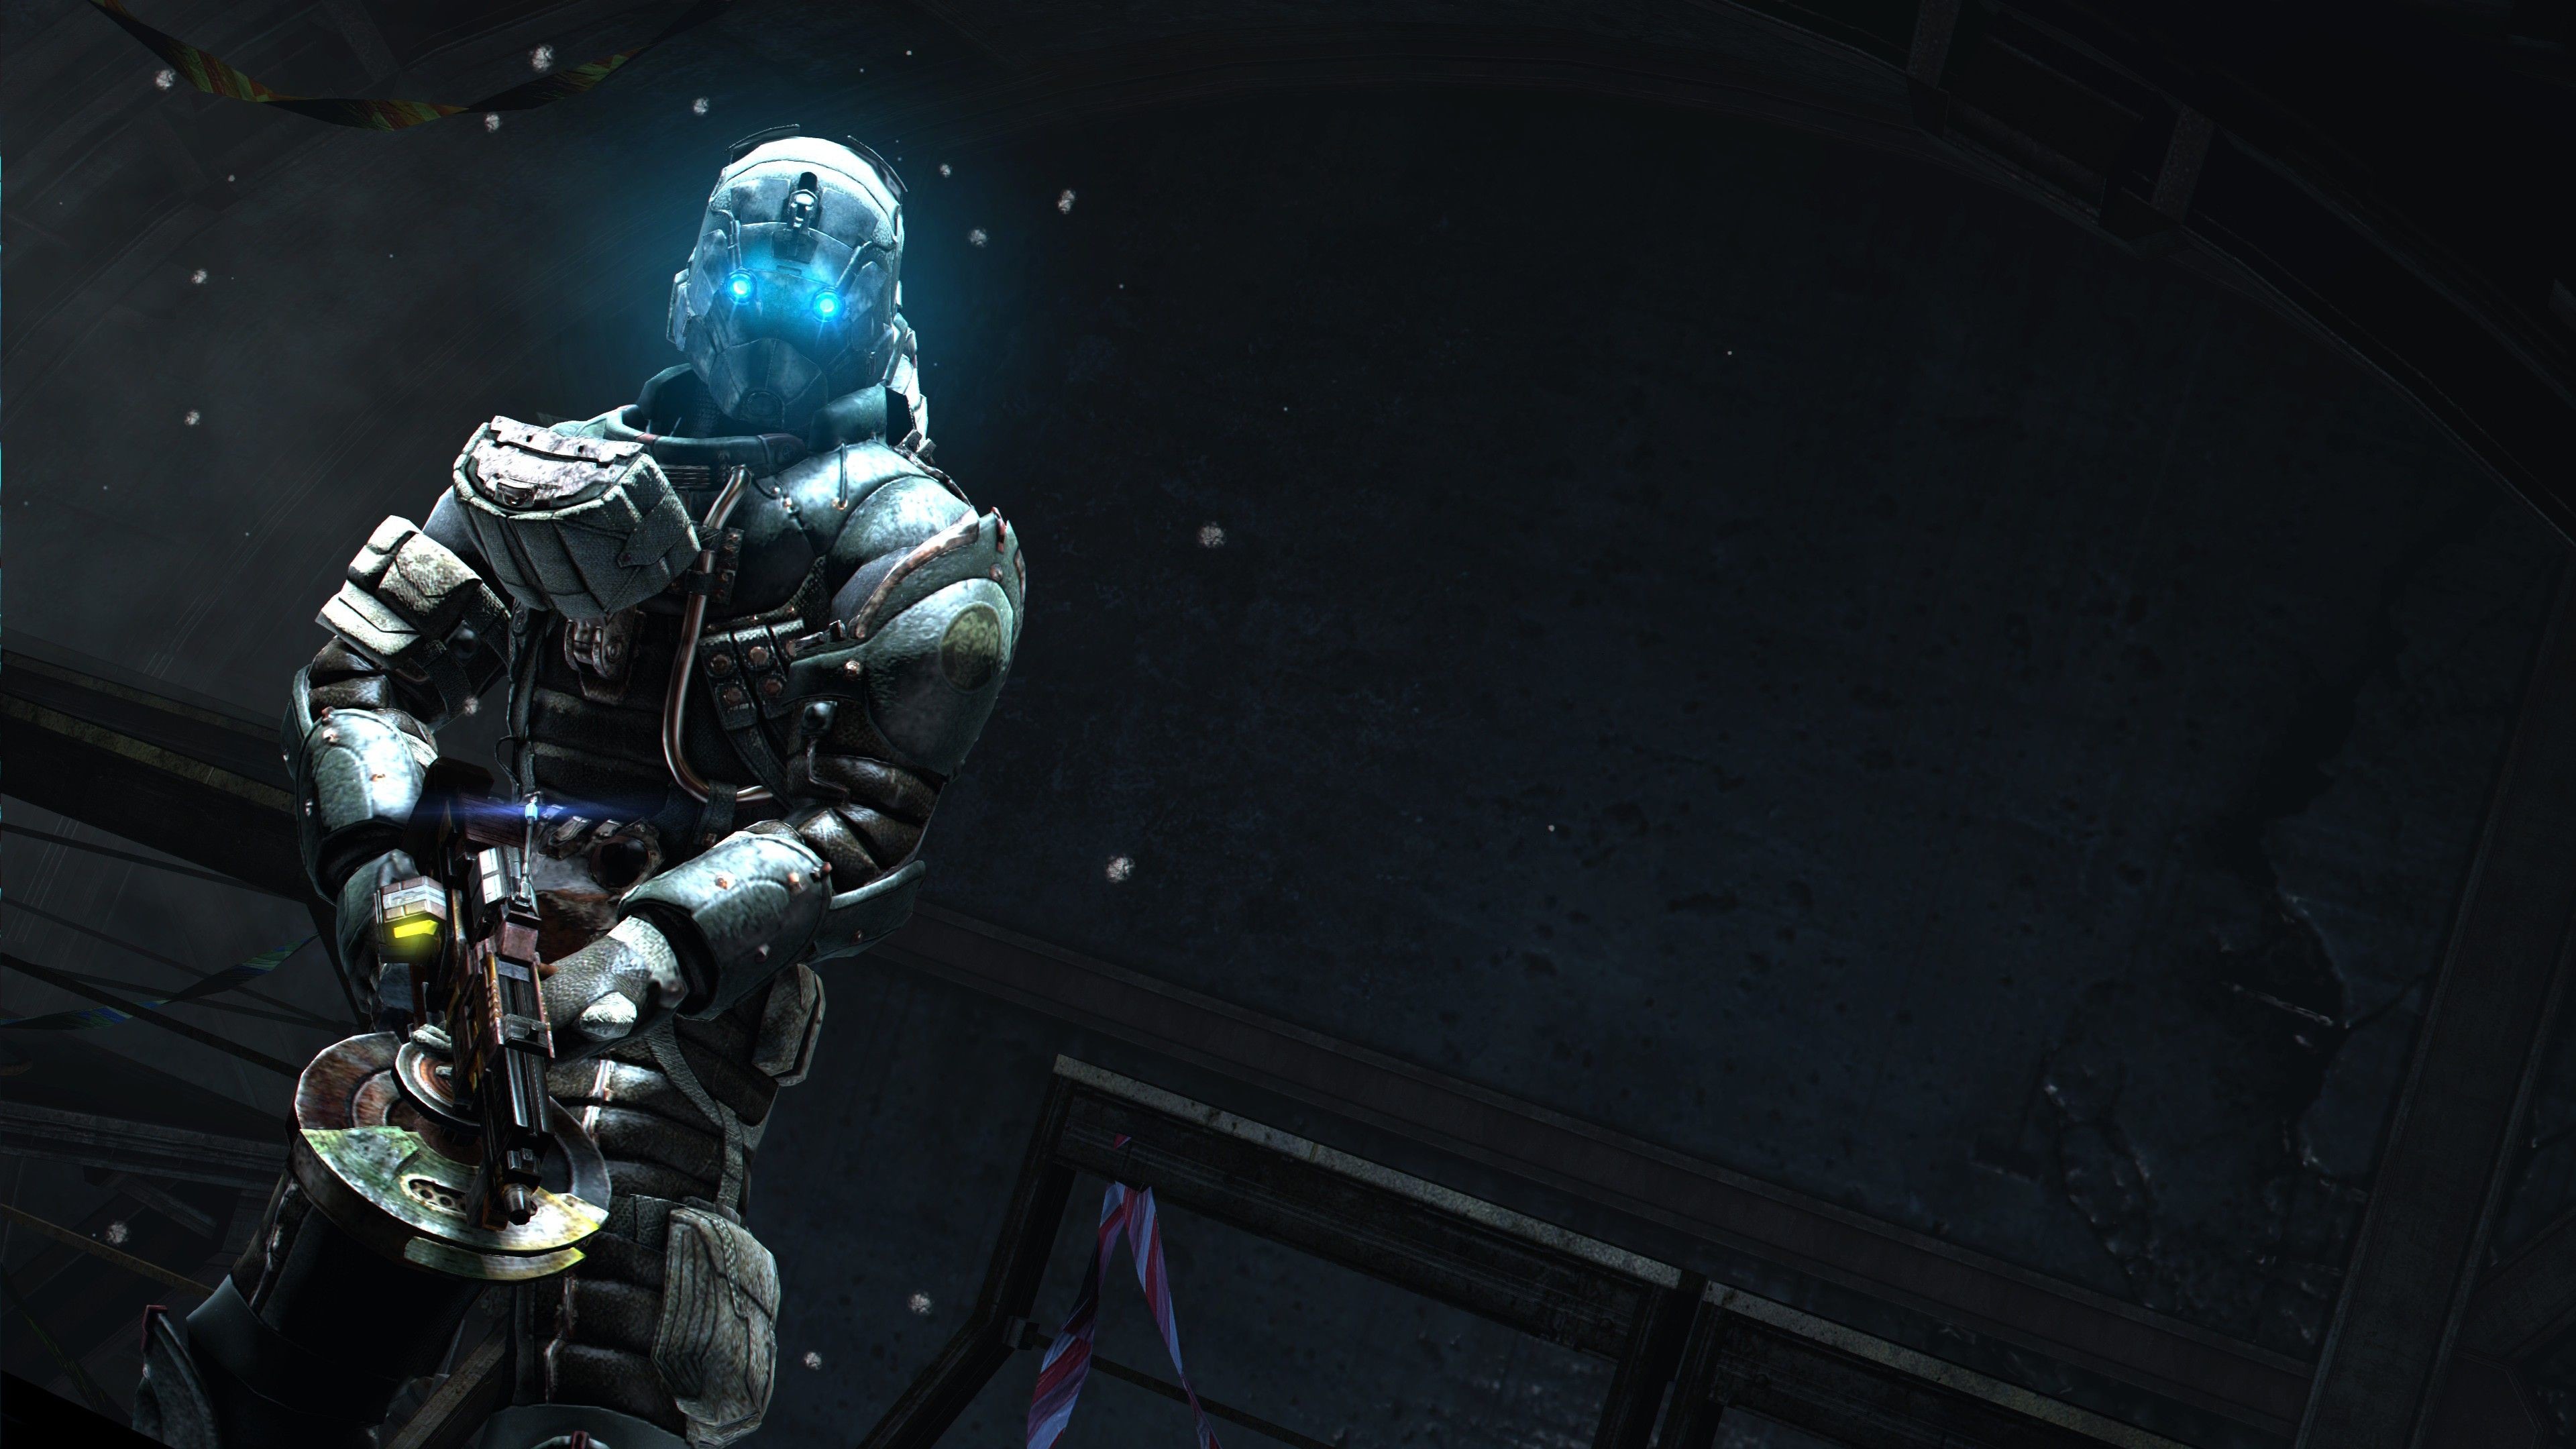 3840x2160 Images Of Dead Space 3